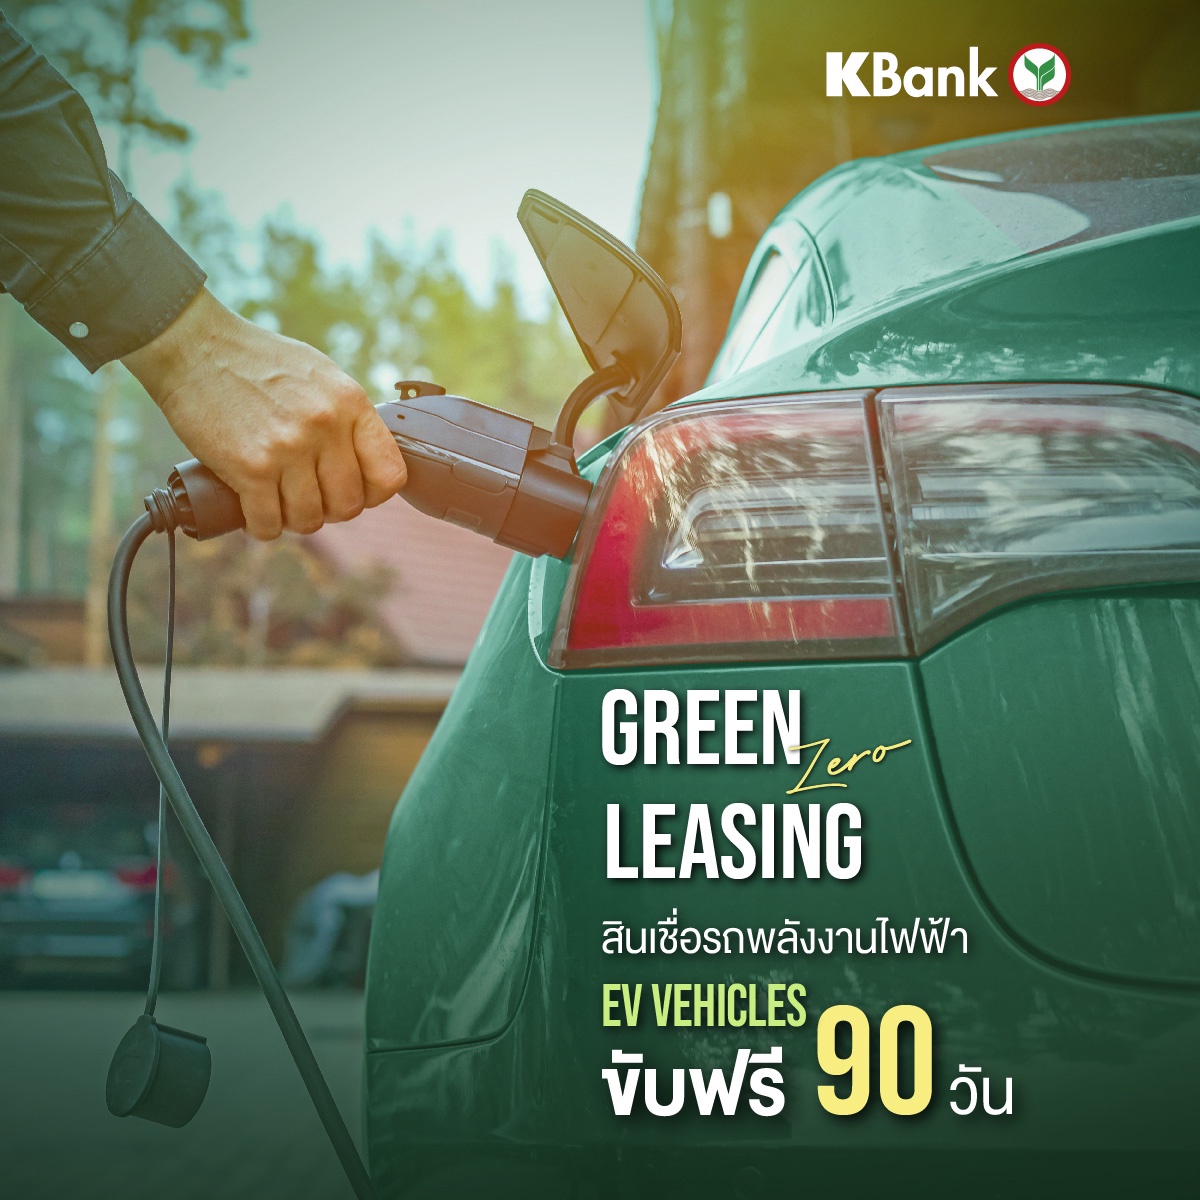 KLeasing touts its 2021 performance with Auto Loan (New Car) growth - bucking the lackluster overall market the company also targets the 'green' market with the launch of the Buy BEV - Enjoy 3-month Free Drive